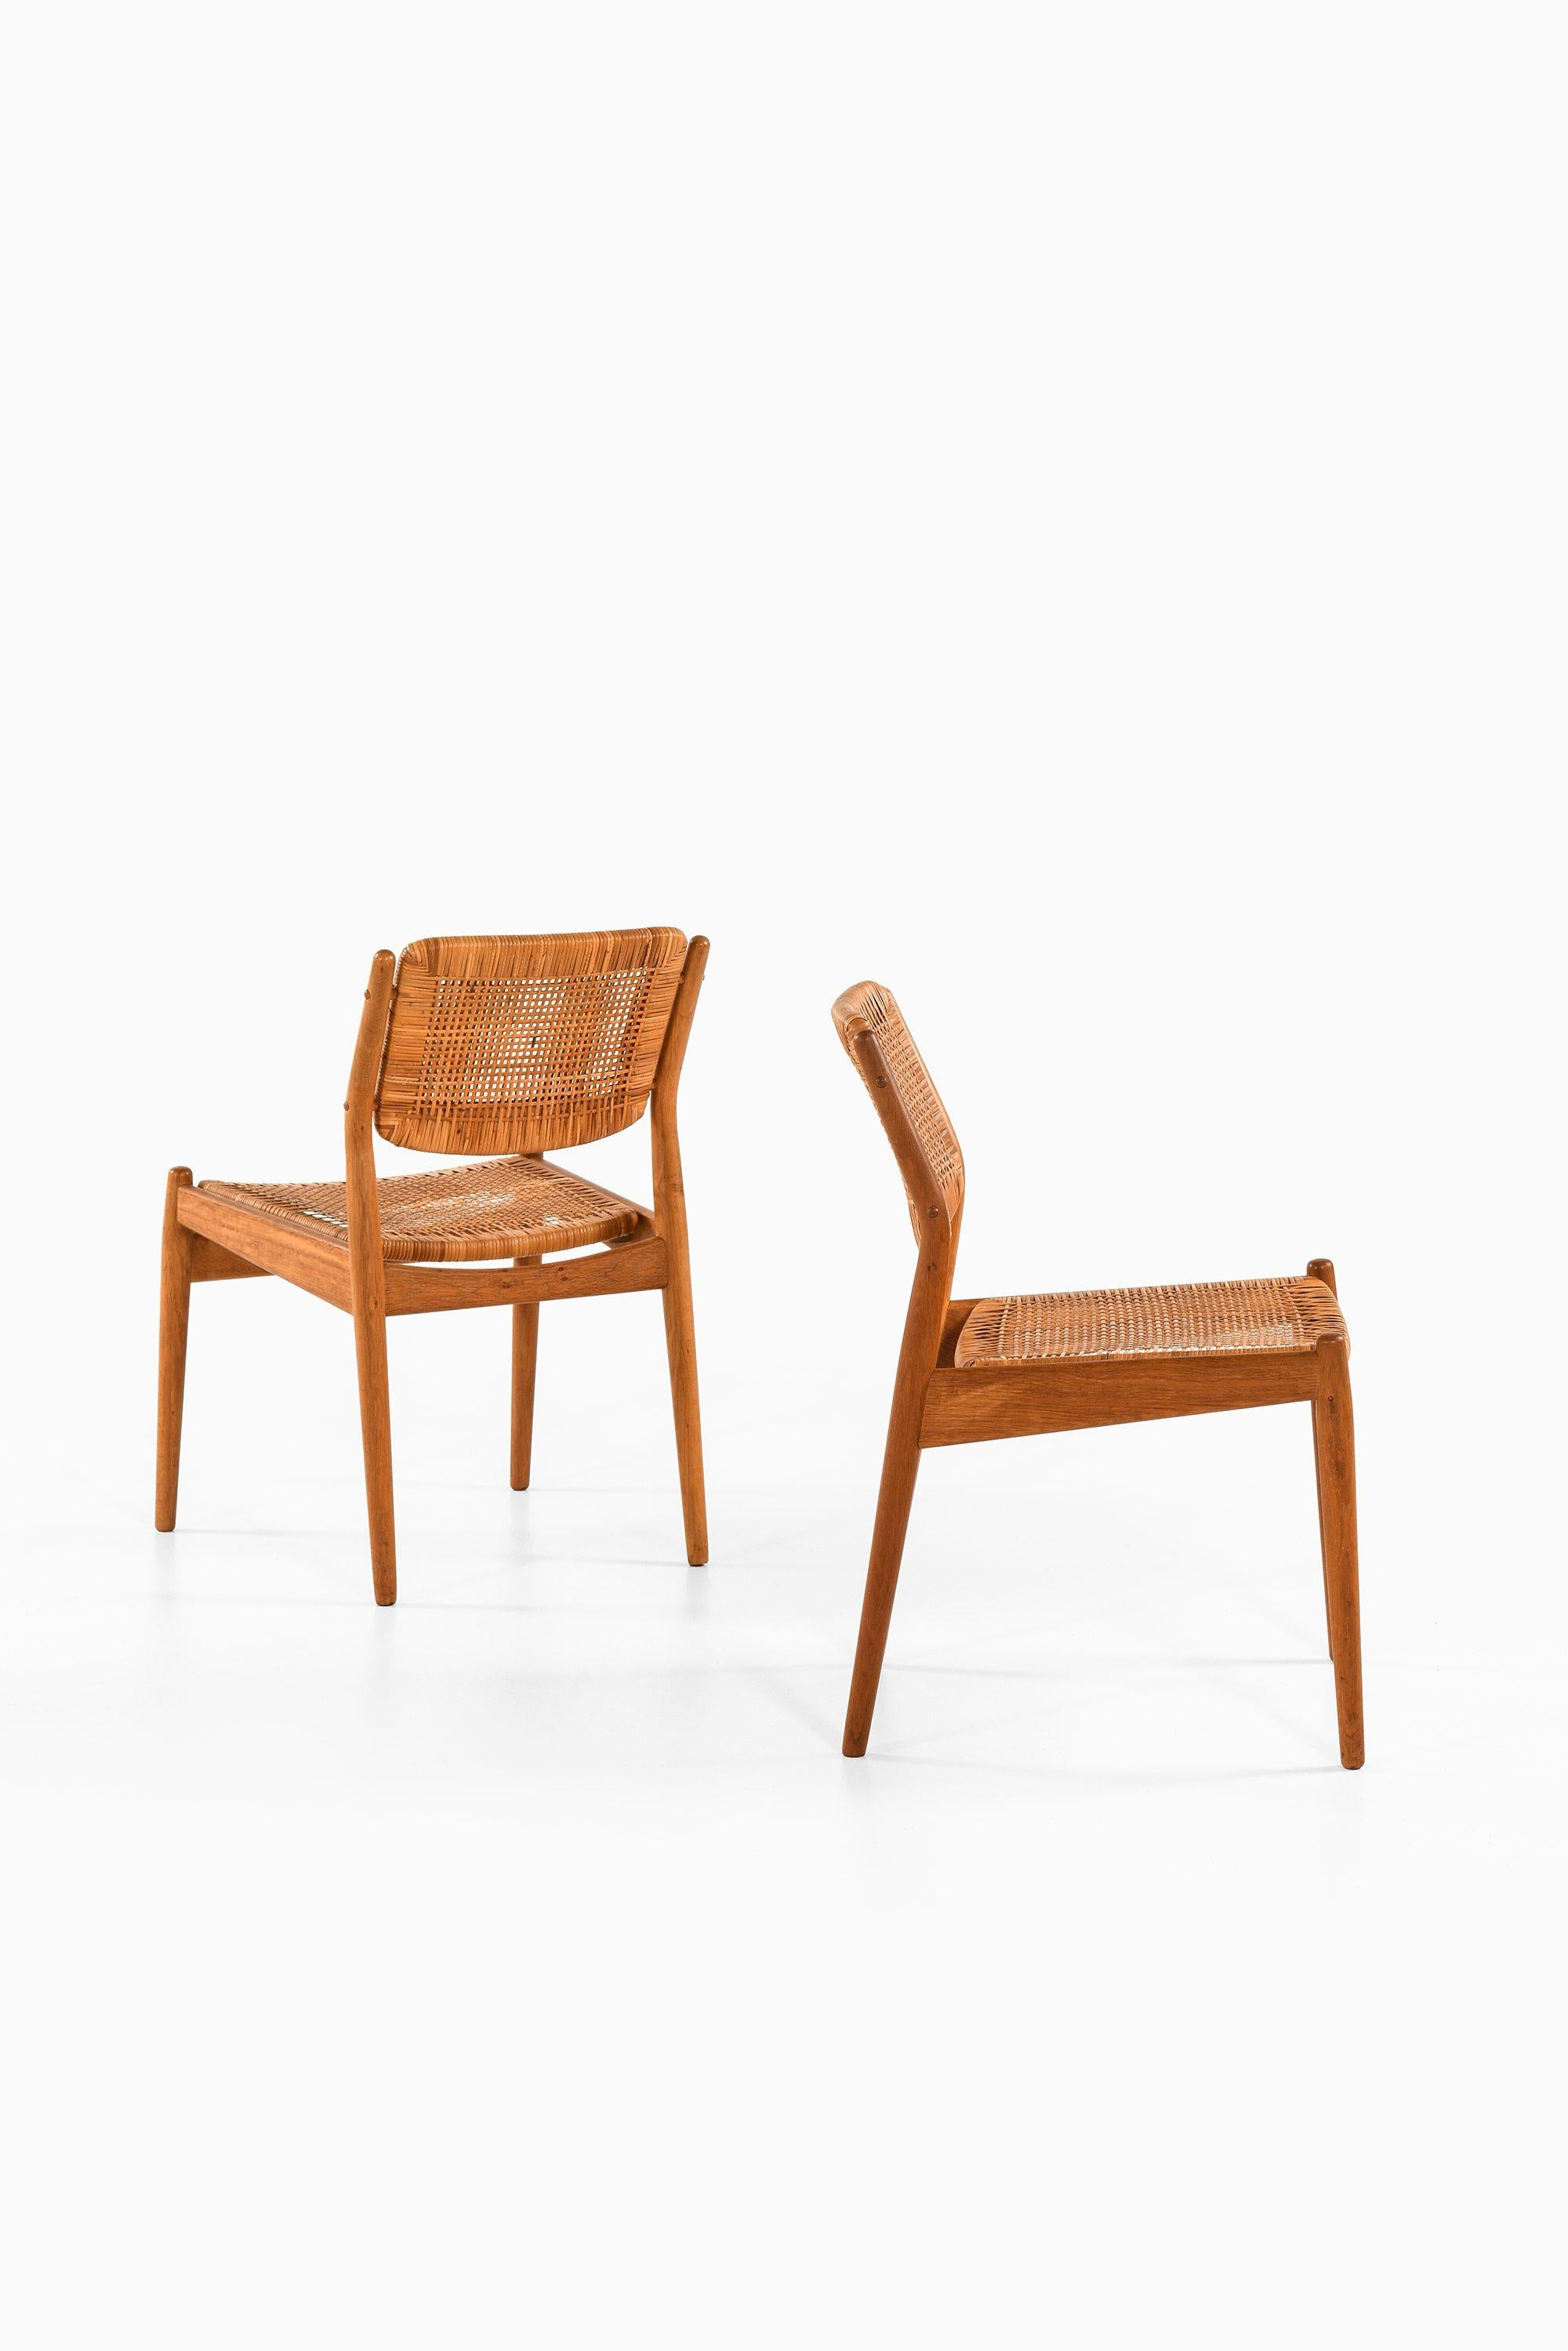 Scandinavian Modern Set of 8 Dining Chairs in Oak and Woven Cane by Arne Vodder, 1951 For Sale